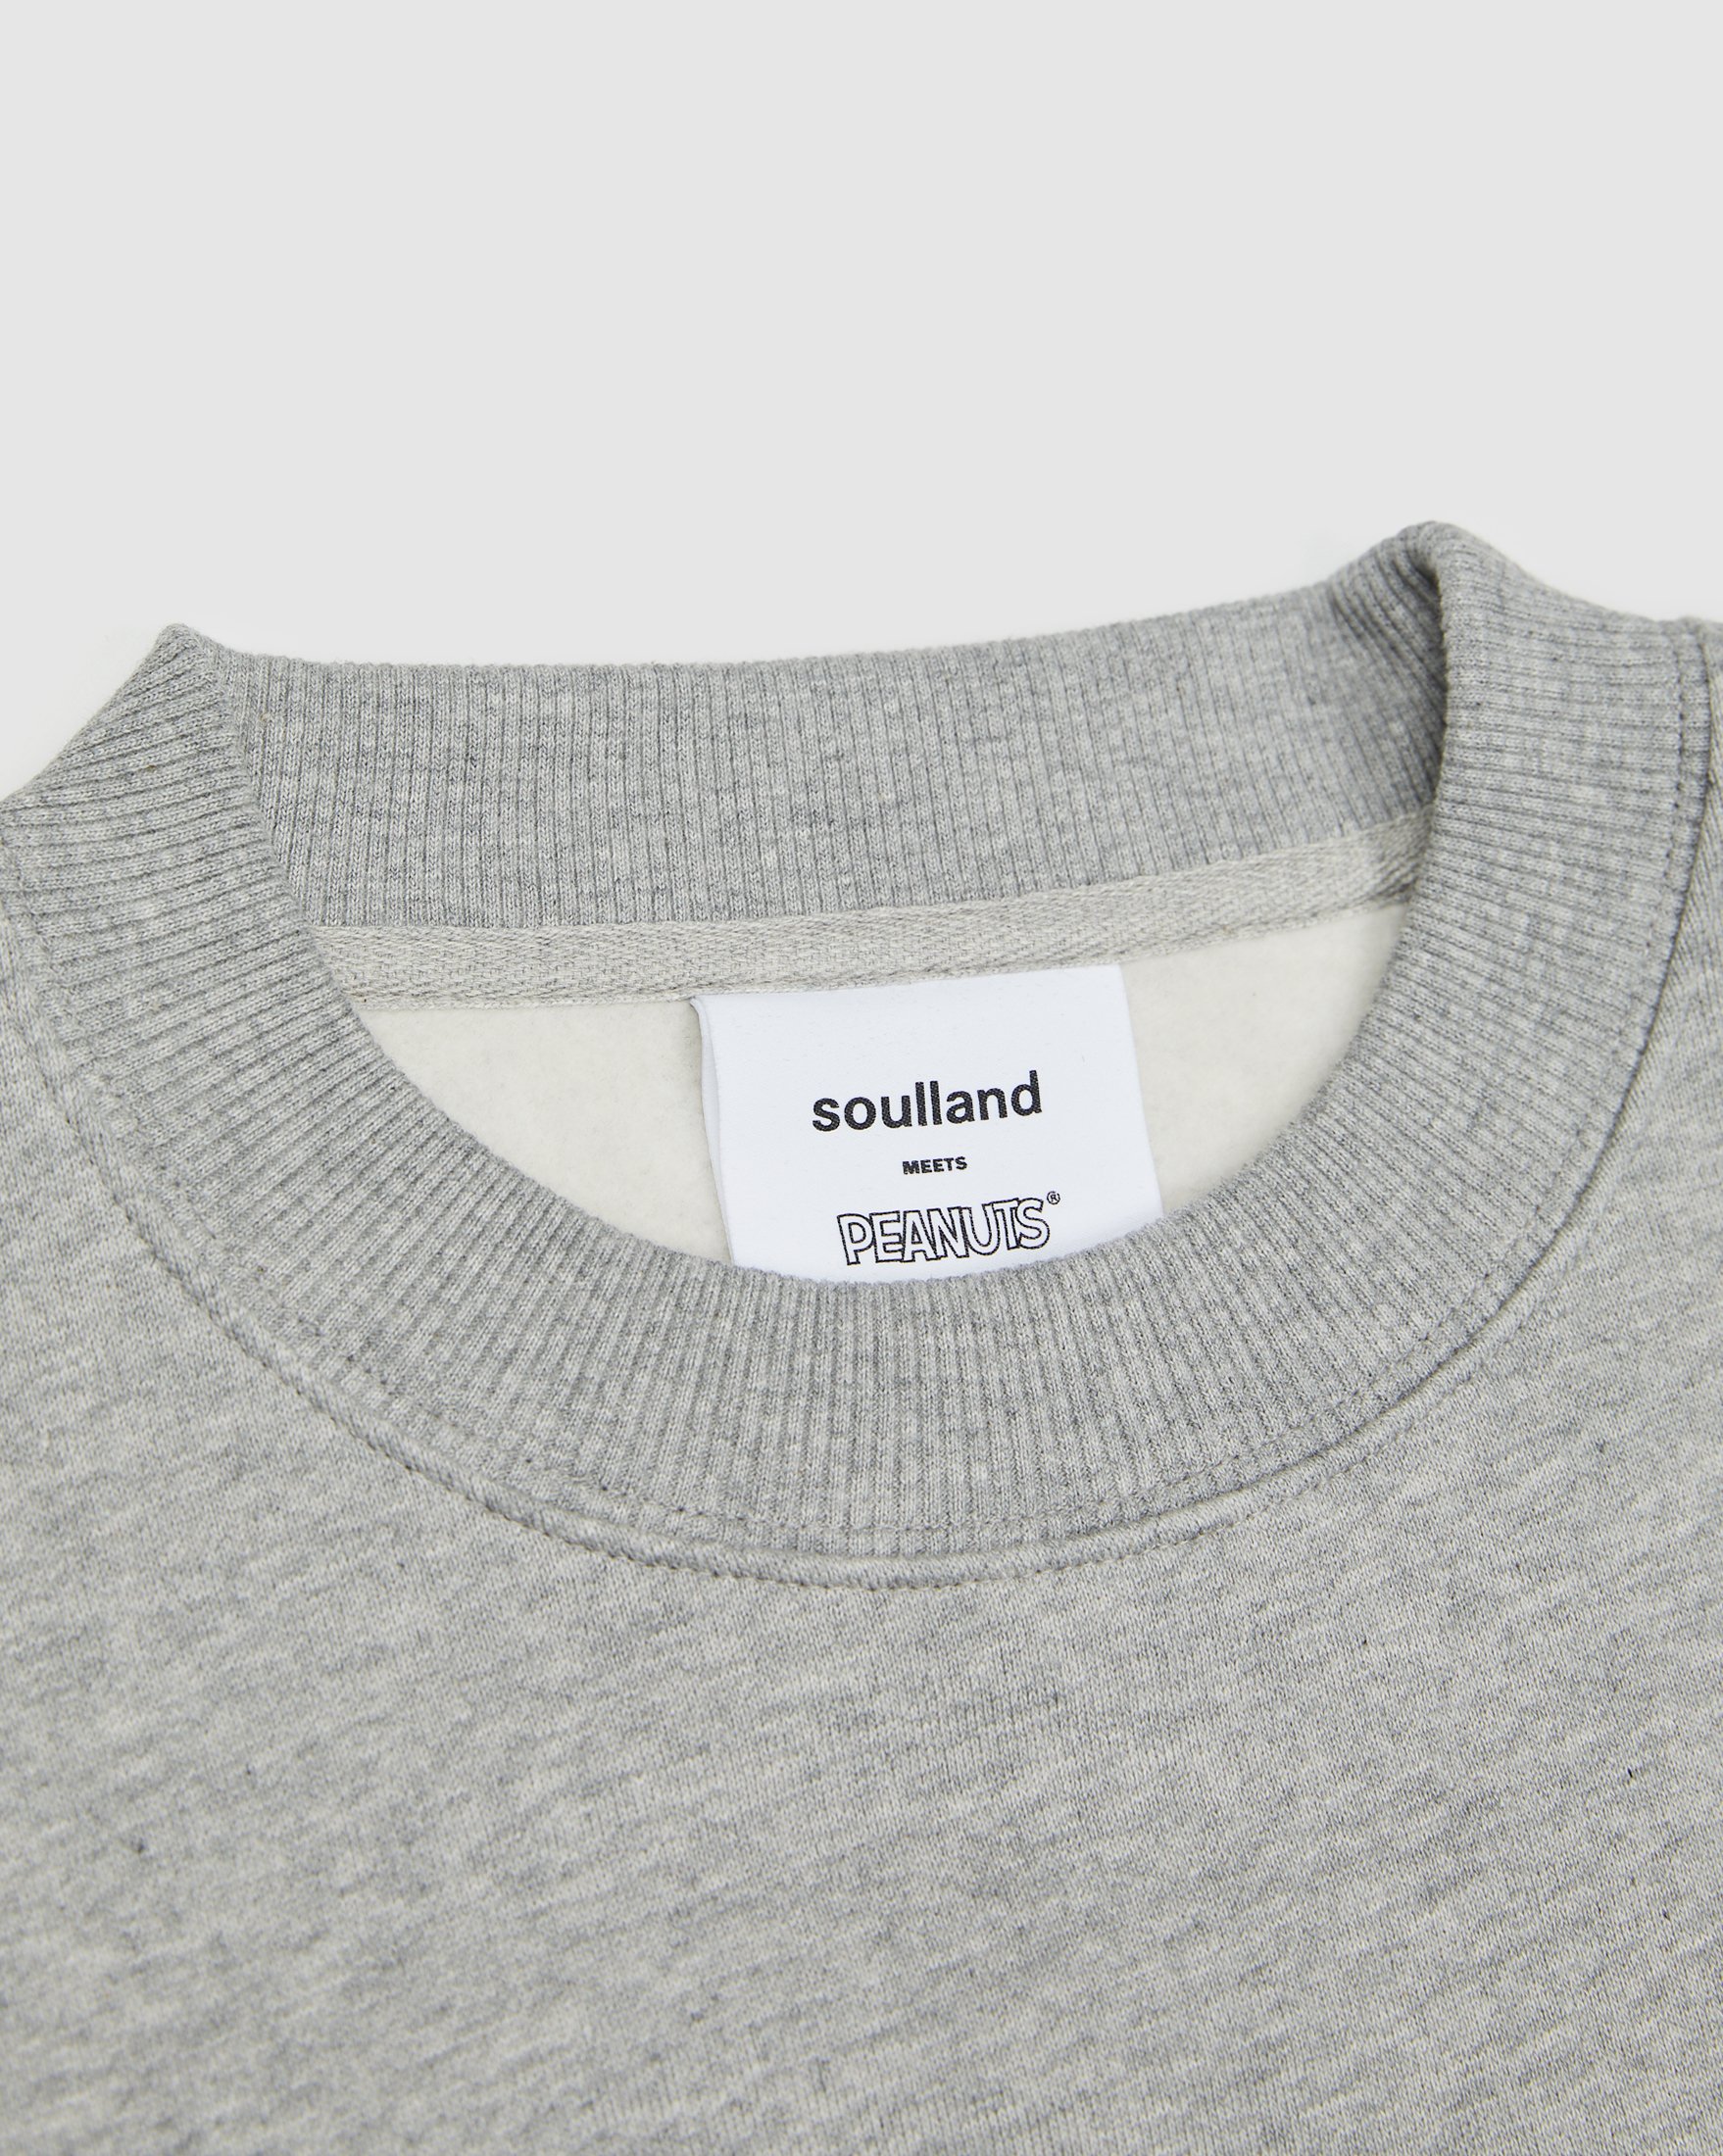 Colette Mon Amour x Soulland - Snoopy Bed Grey Crewneck - Clothing - Grey - Image 3